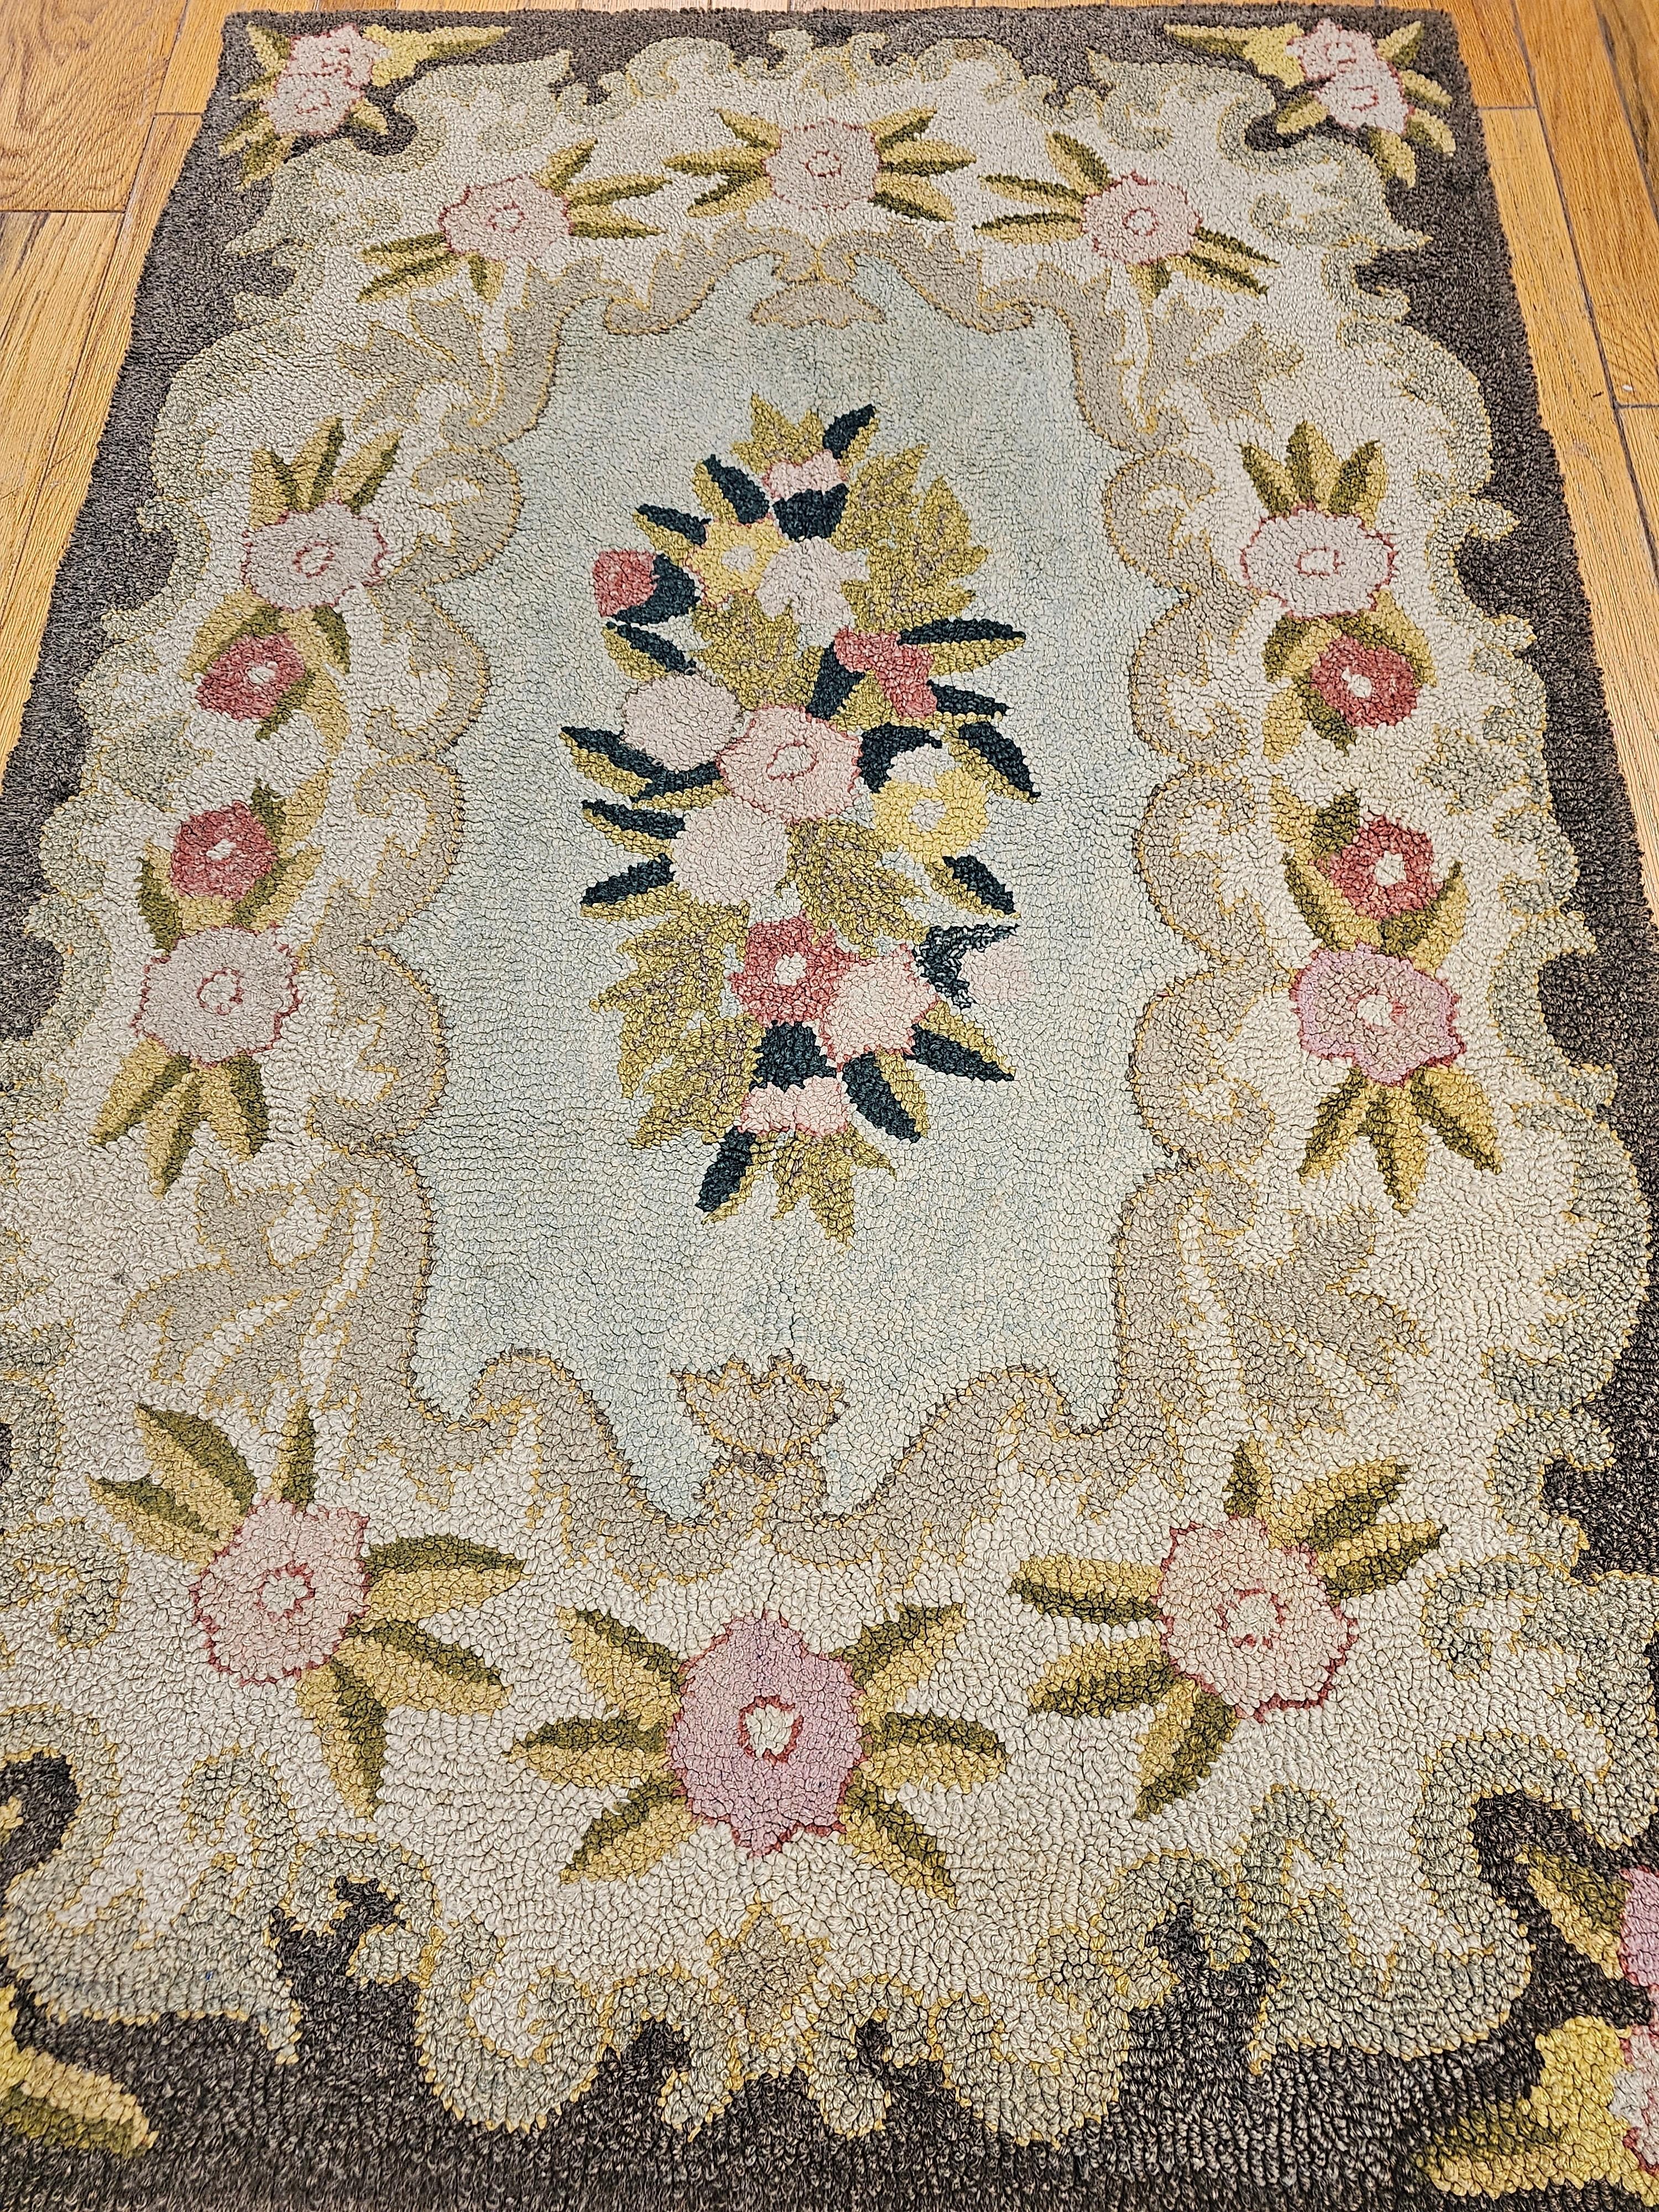 Vintage American Hand Hooked Area Rug with a Floral Pattern in Pastel Colors For Sale 6